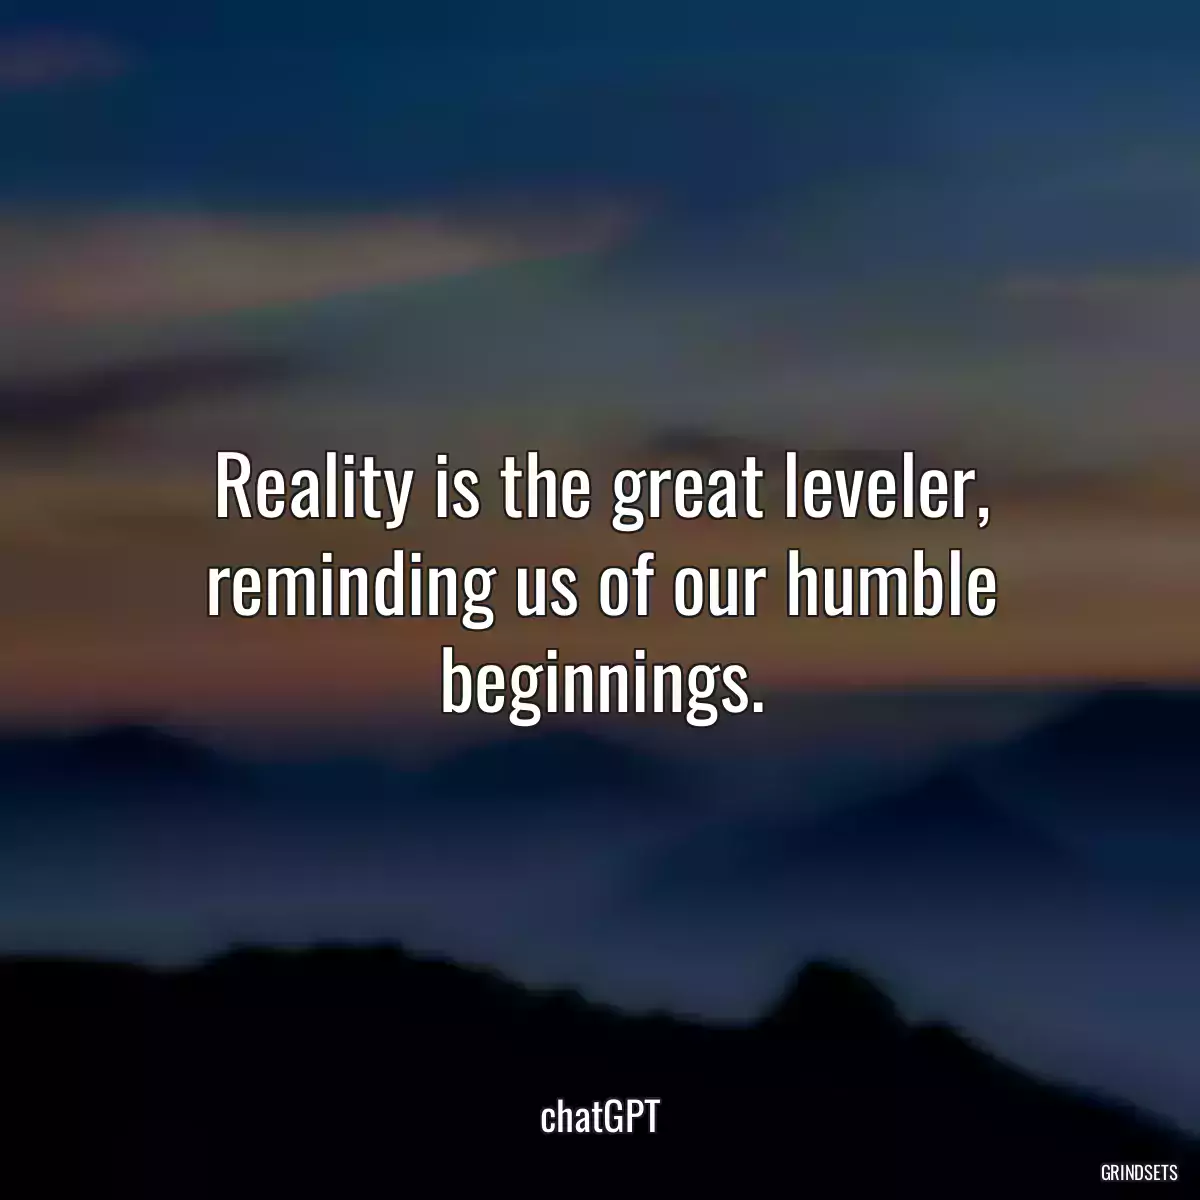 Reality is the great leveler, reminding us of our humble beginnings.